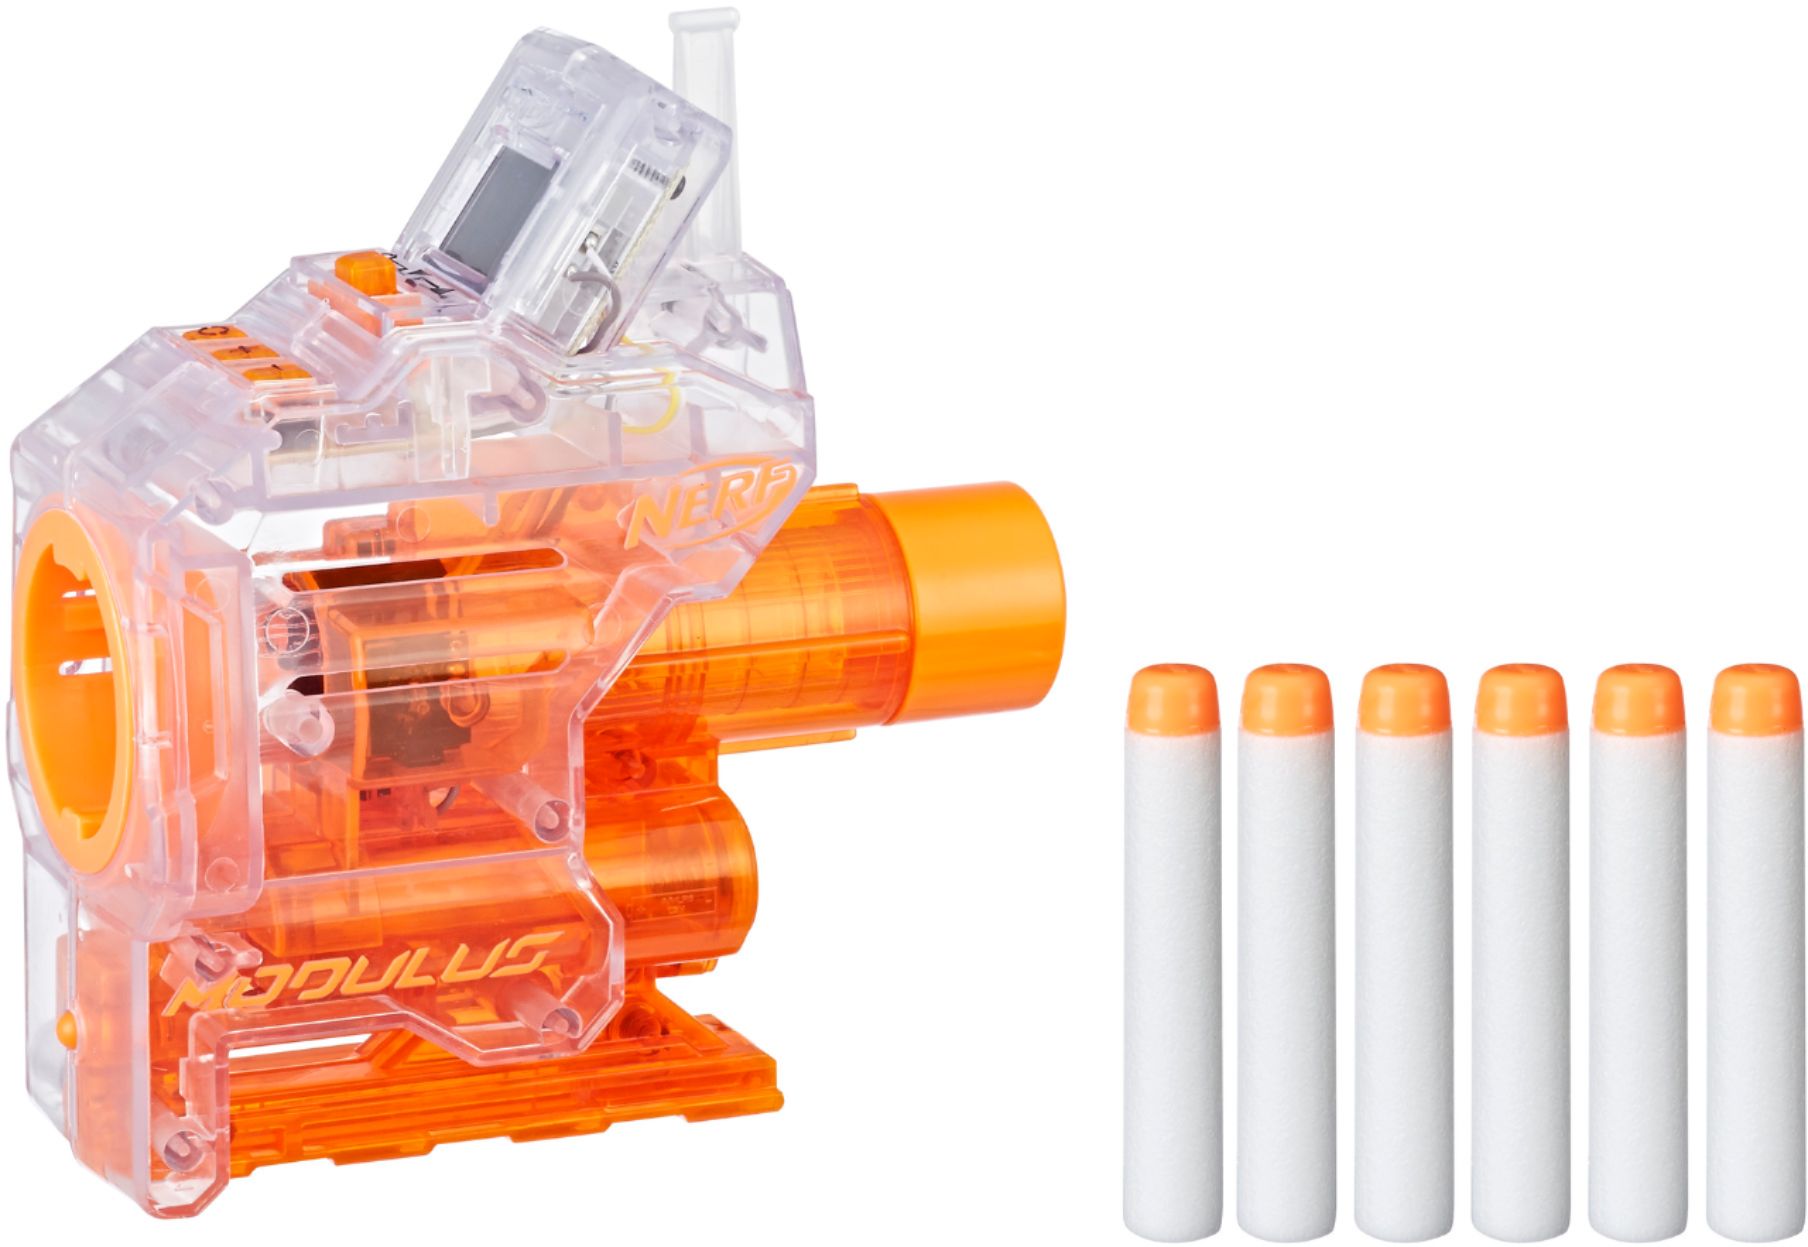 Styles May Vary Modulus Ghost Ops Upgrade Kit Nerf 